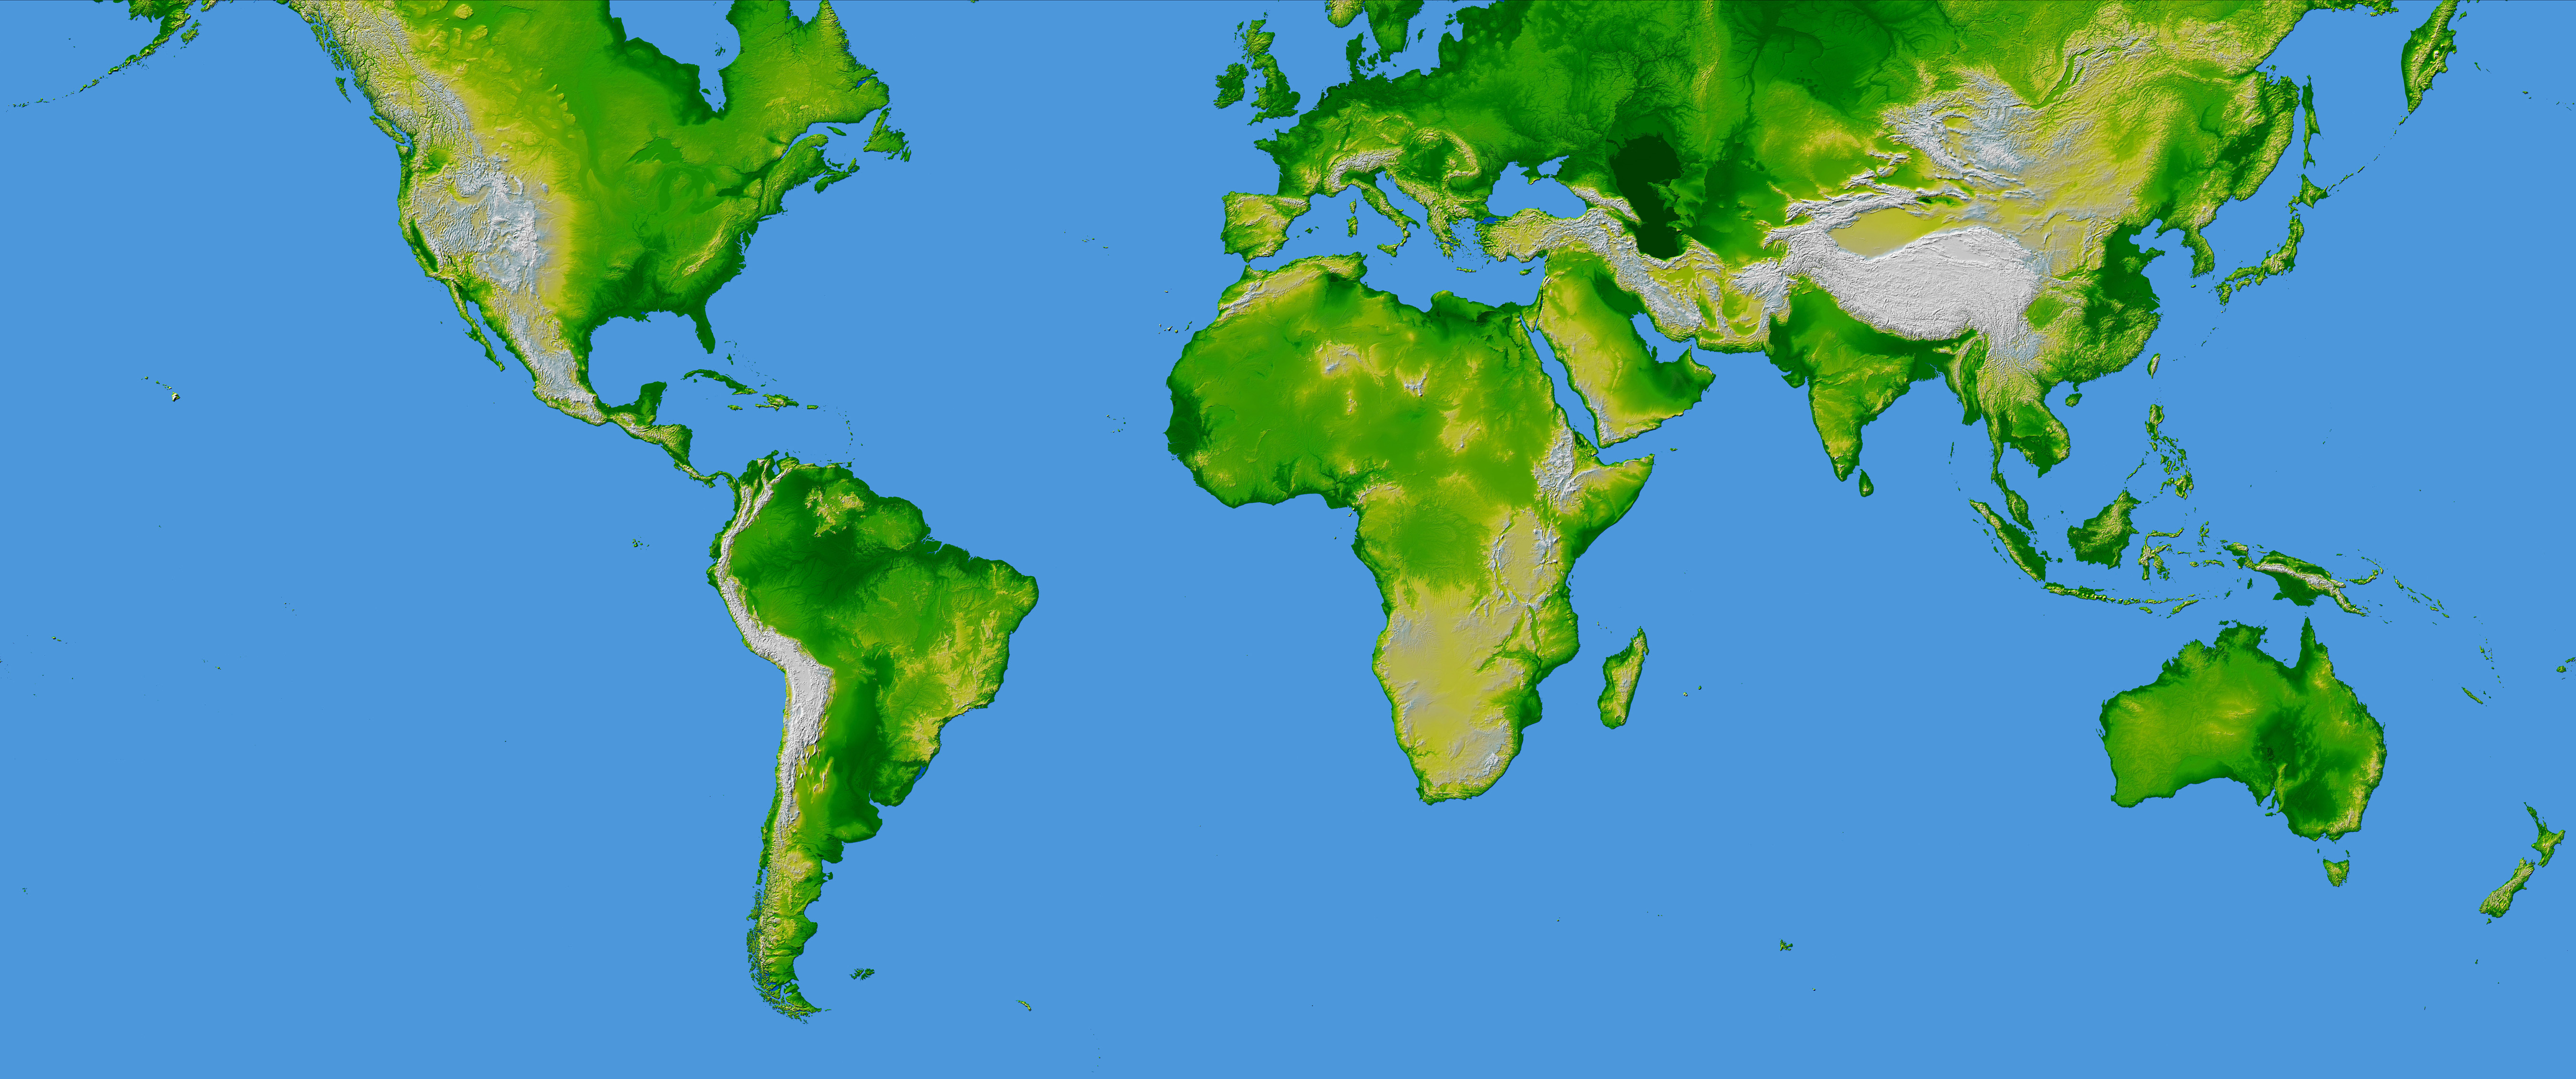 Topography Of The World